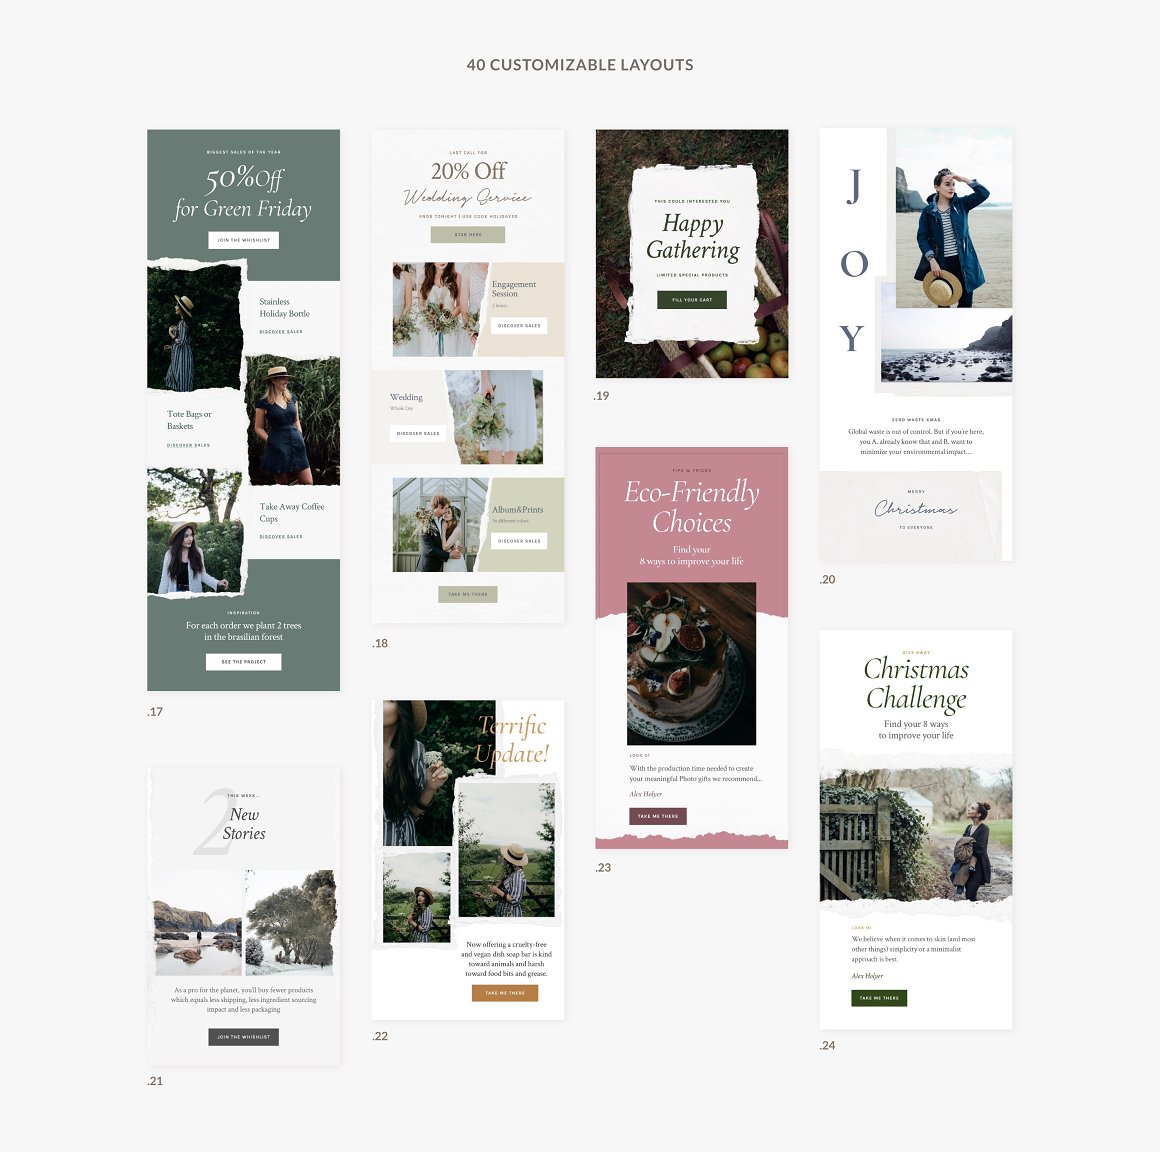 An image pack of gorgeous email design templates.